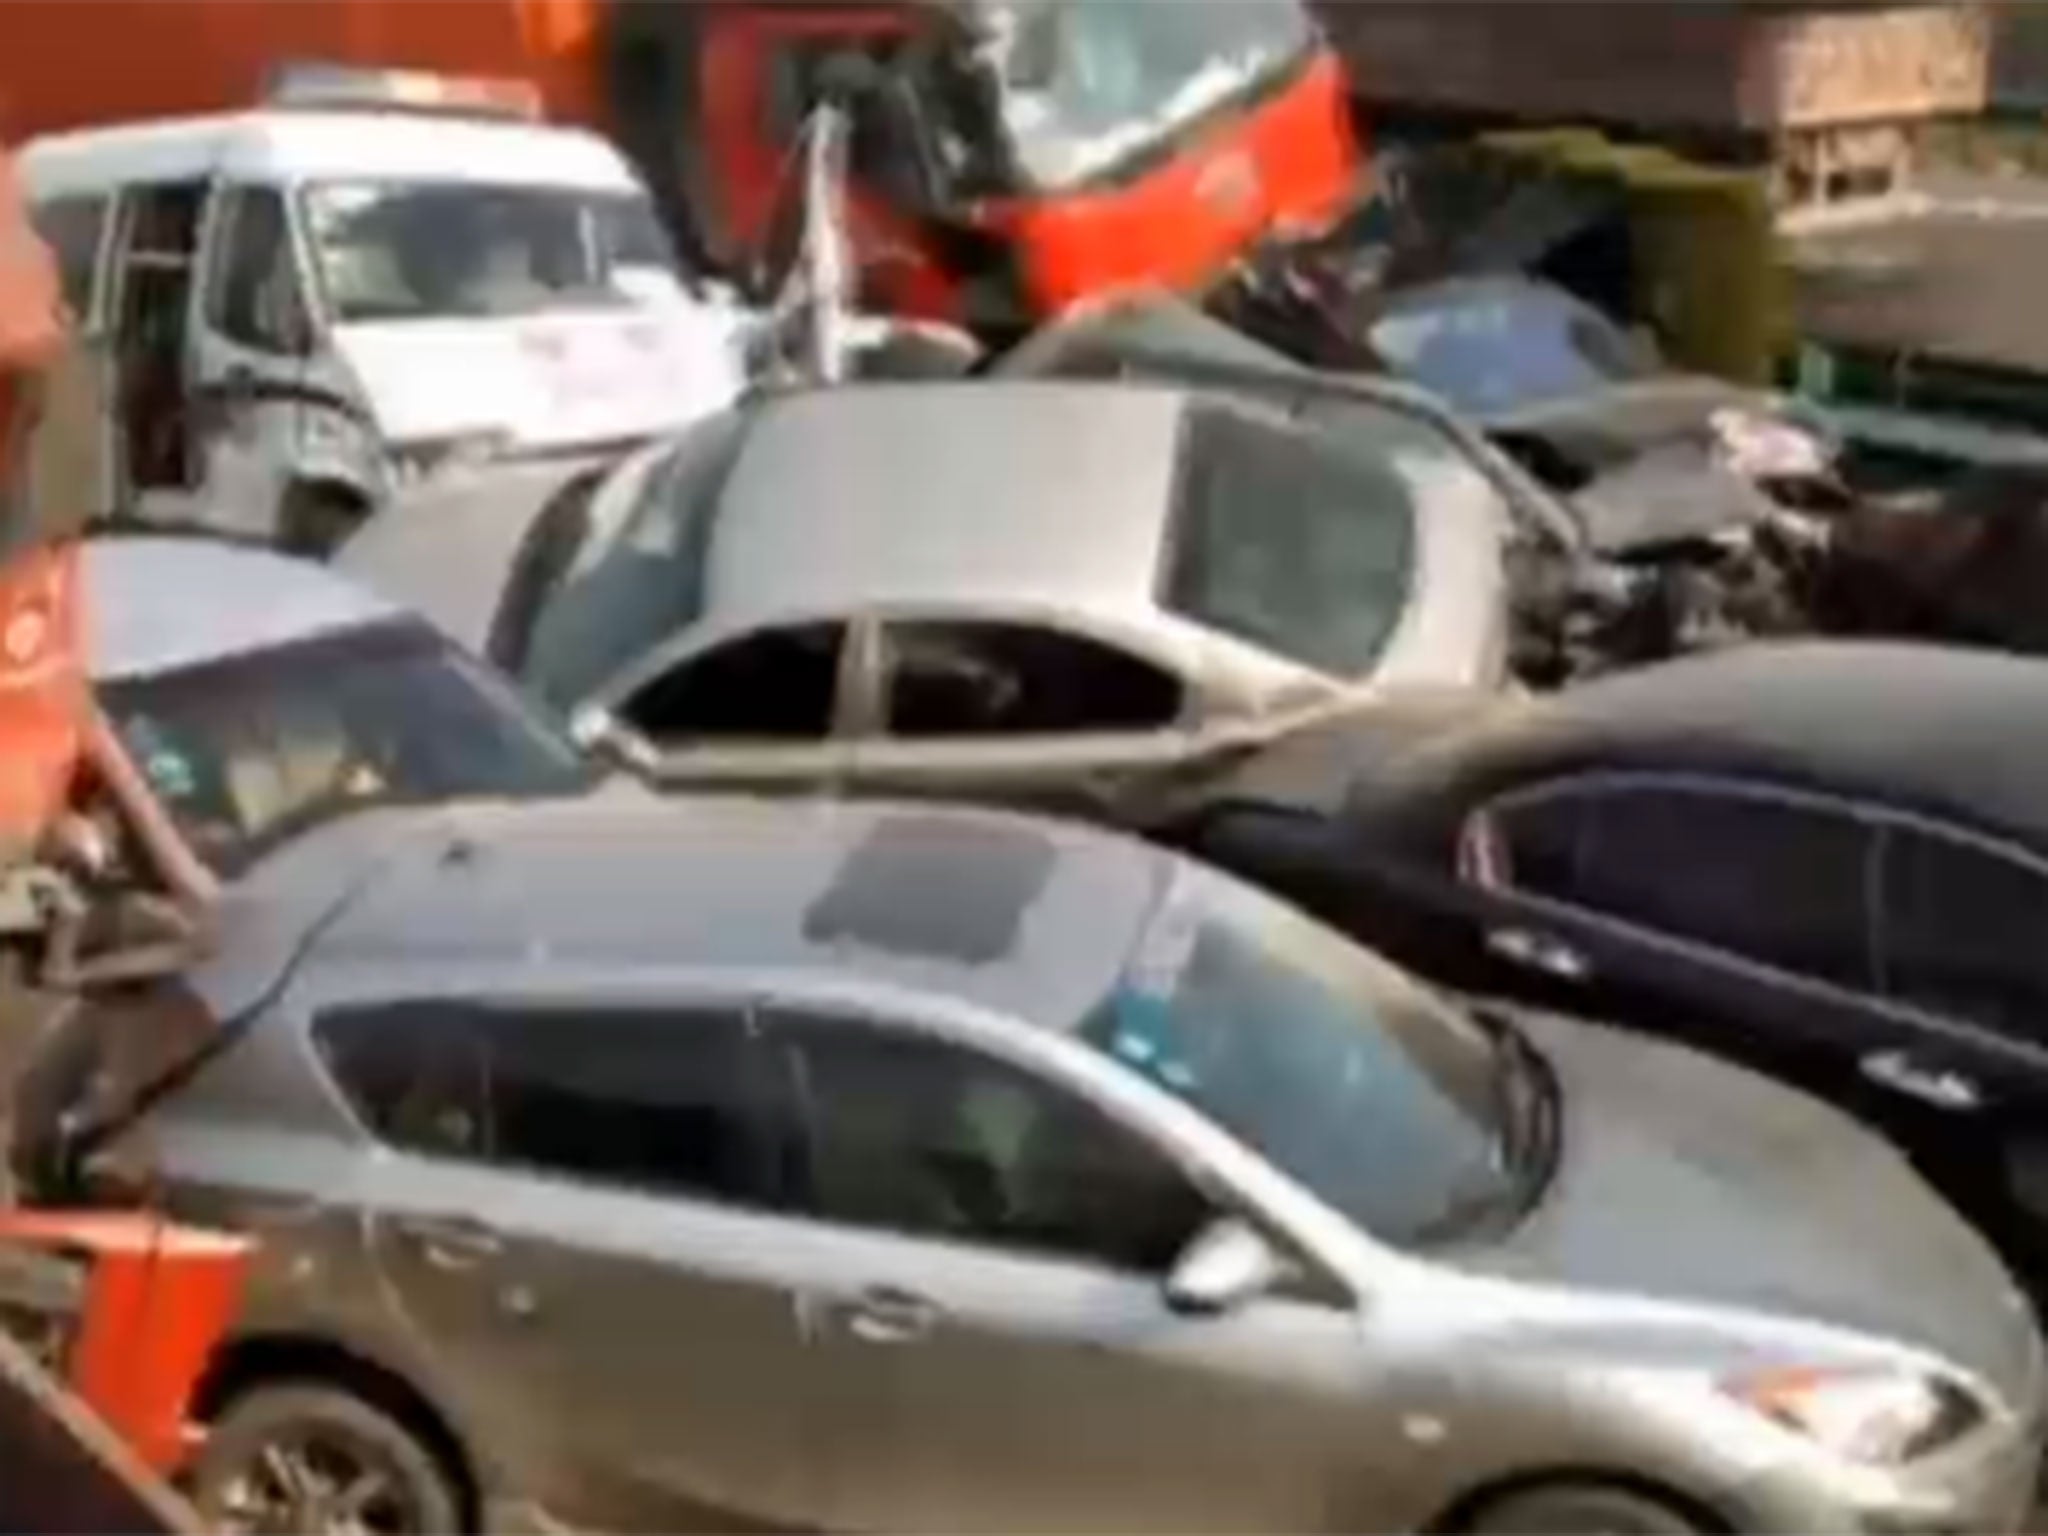 70 cars were involved in the pile-up and brought traffic to a standstill on the road